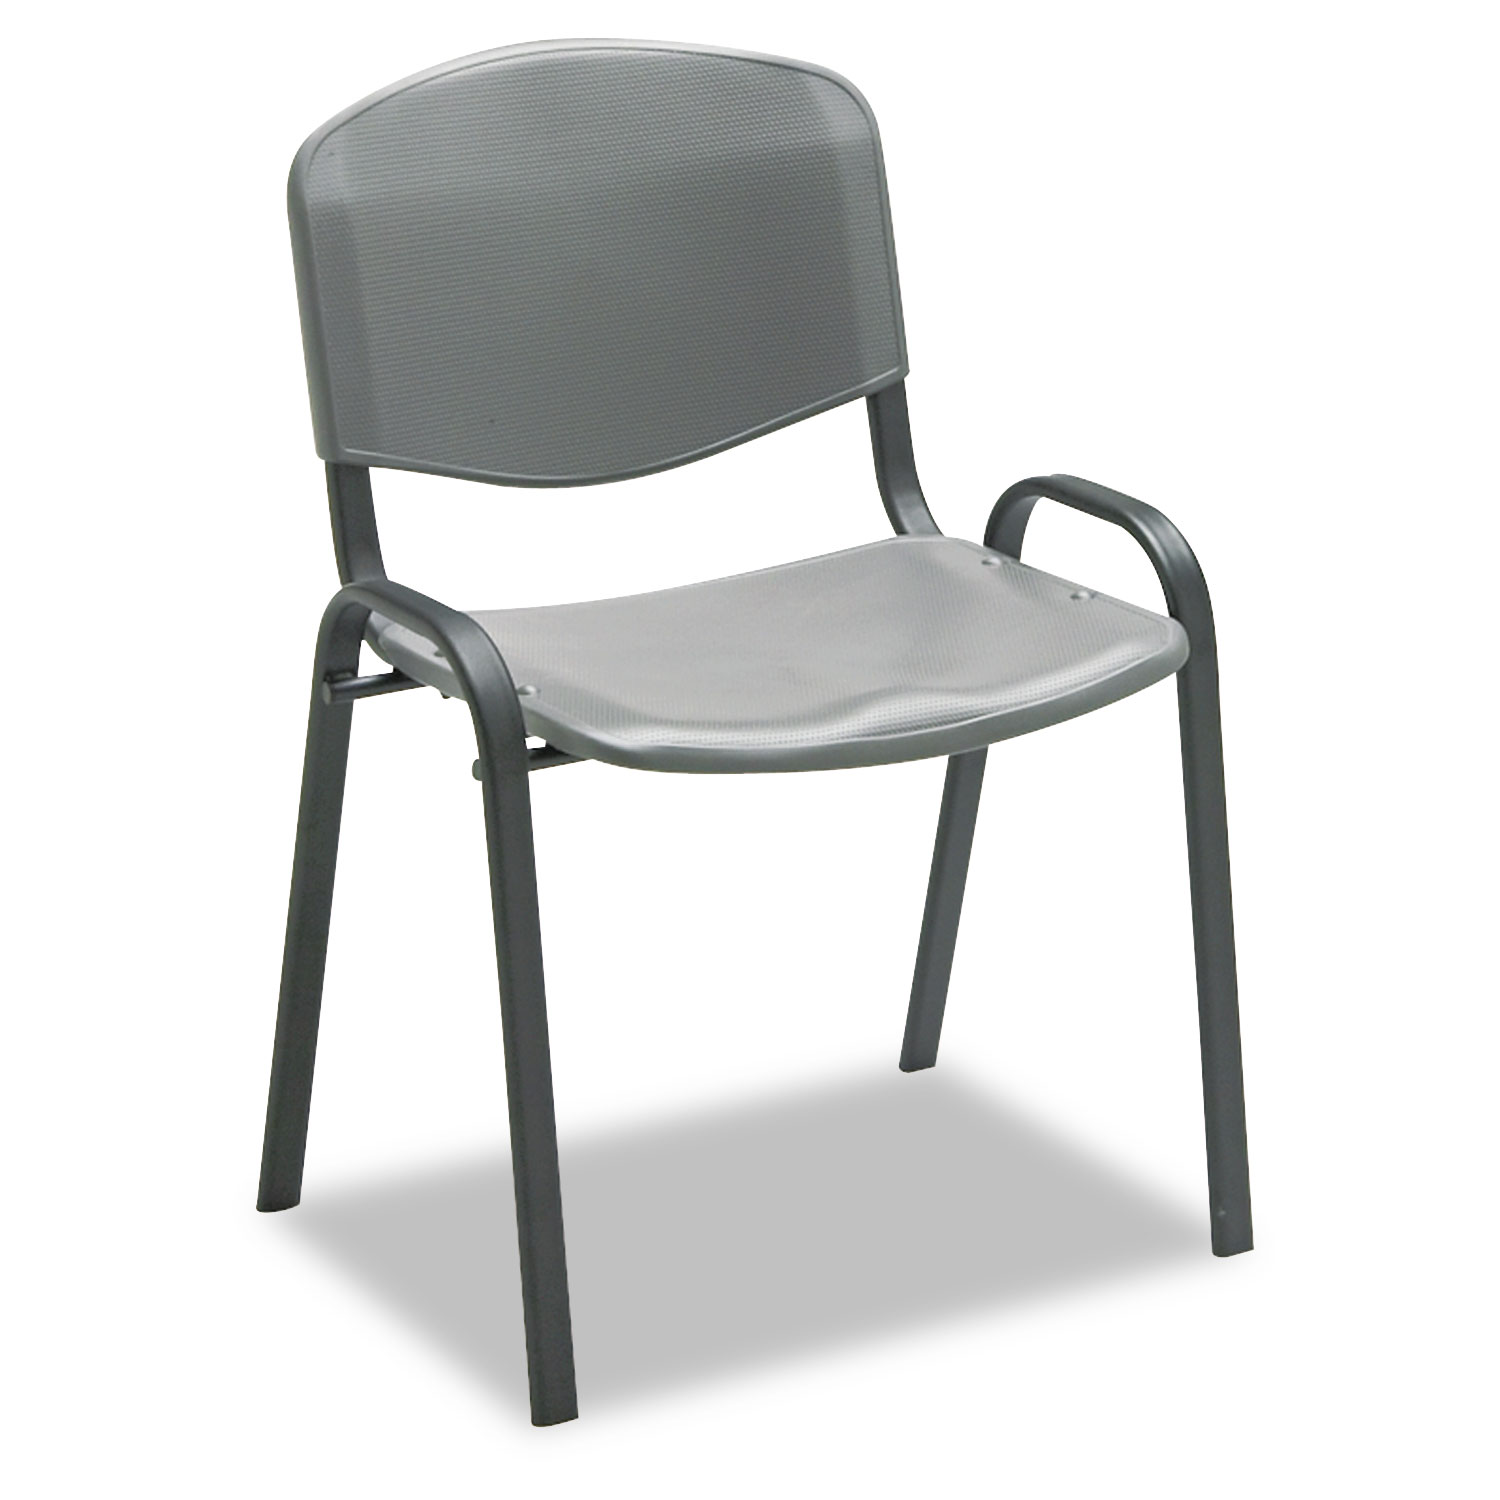  Safco 4185CH Stacking Chair, Charcoal Seat/Charcoal Back, Black Base, 4/Carton (SAF4185CH) 